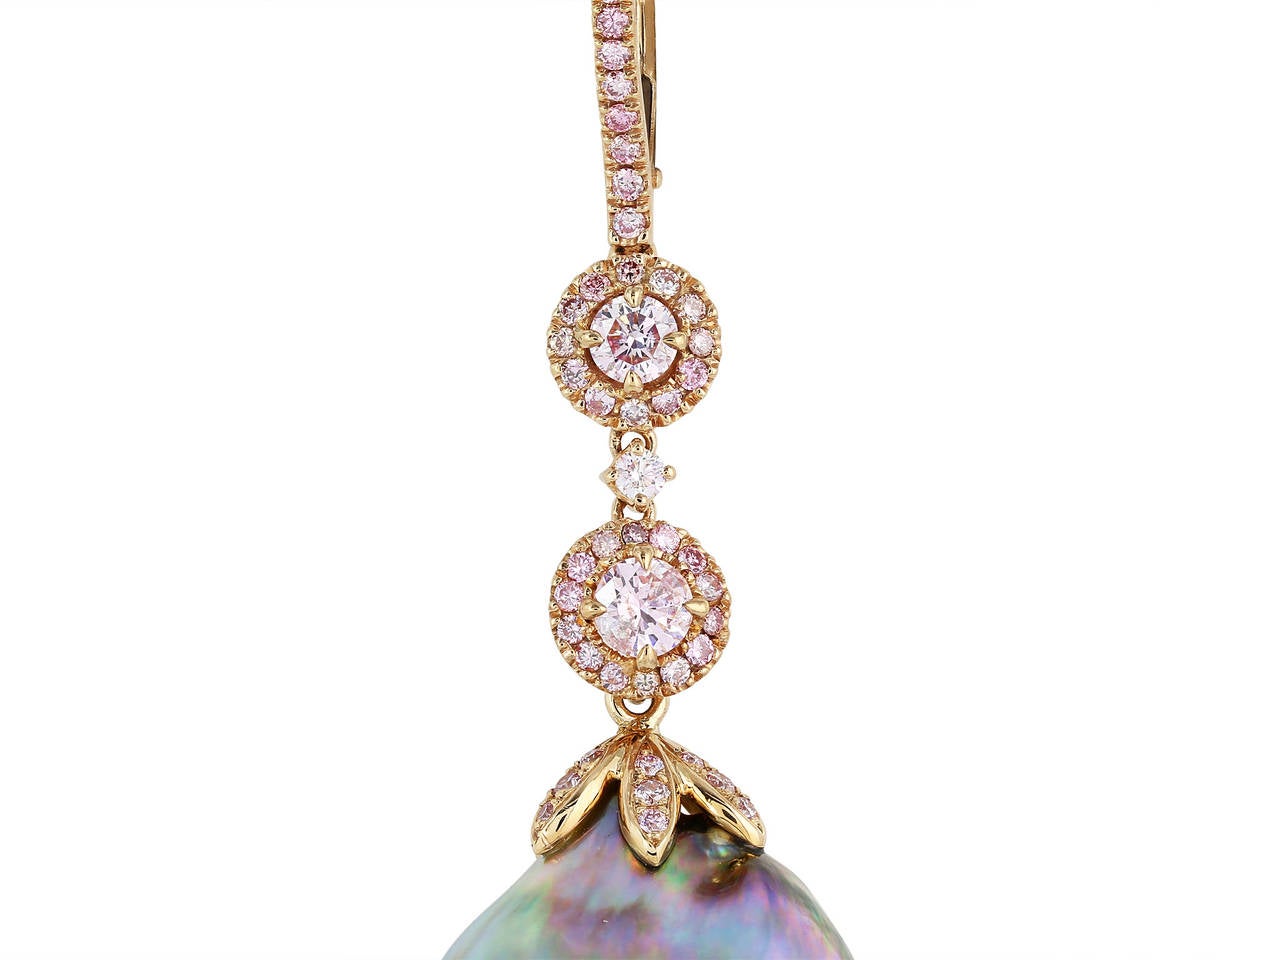 18 karat rose gold drop earrings consisting of 4 round brilliant cut pink diamonds having a total weight of .71 carats each surrounded by halos of pave set pink full cut diamonds and 2 baroque black South Sea pearl drops accented with pave set pink